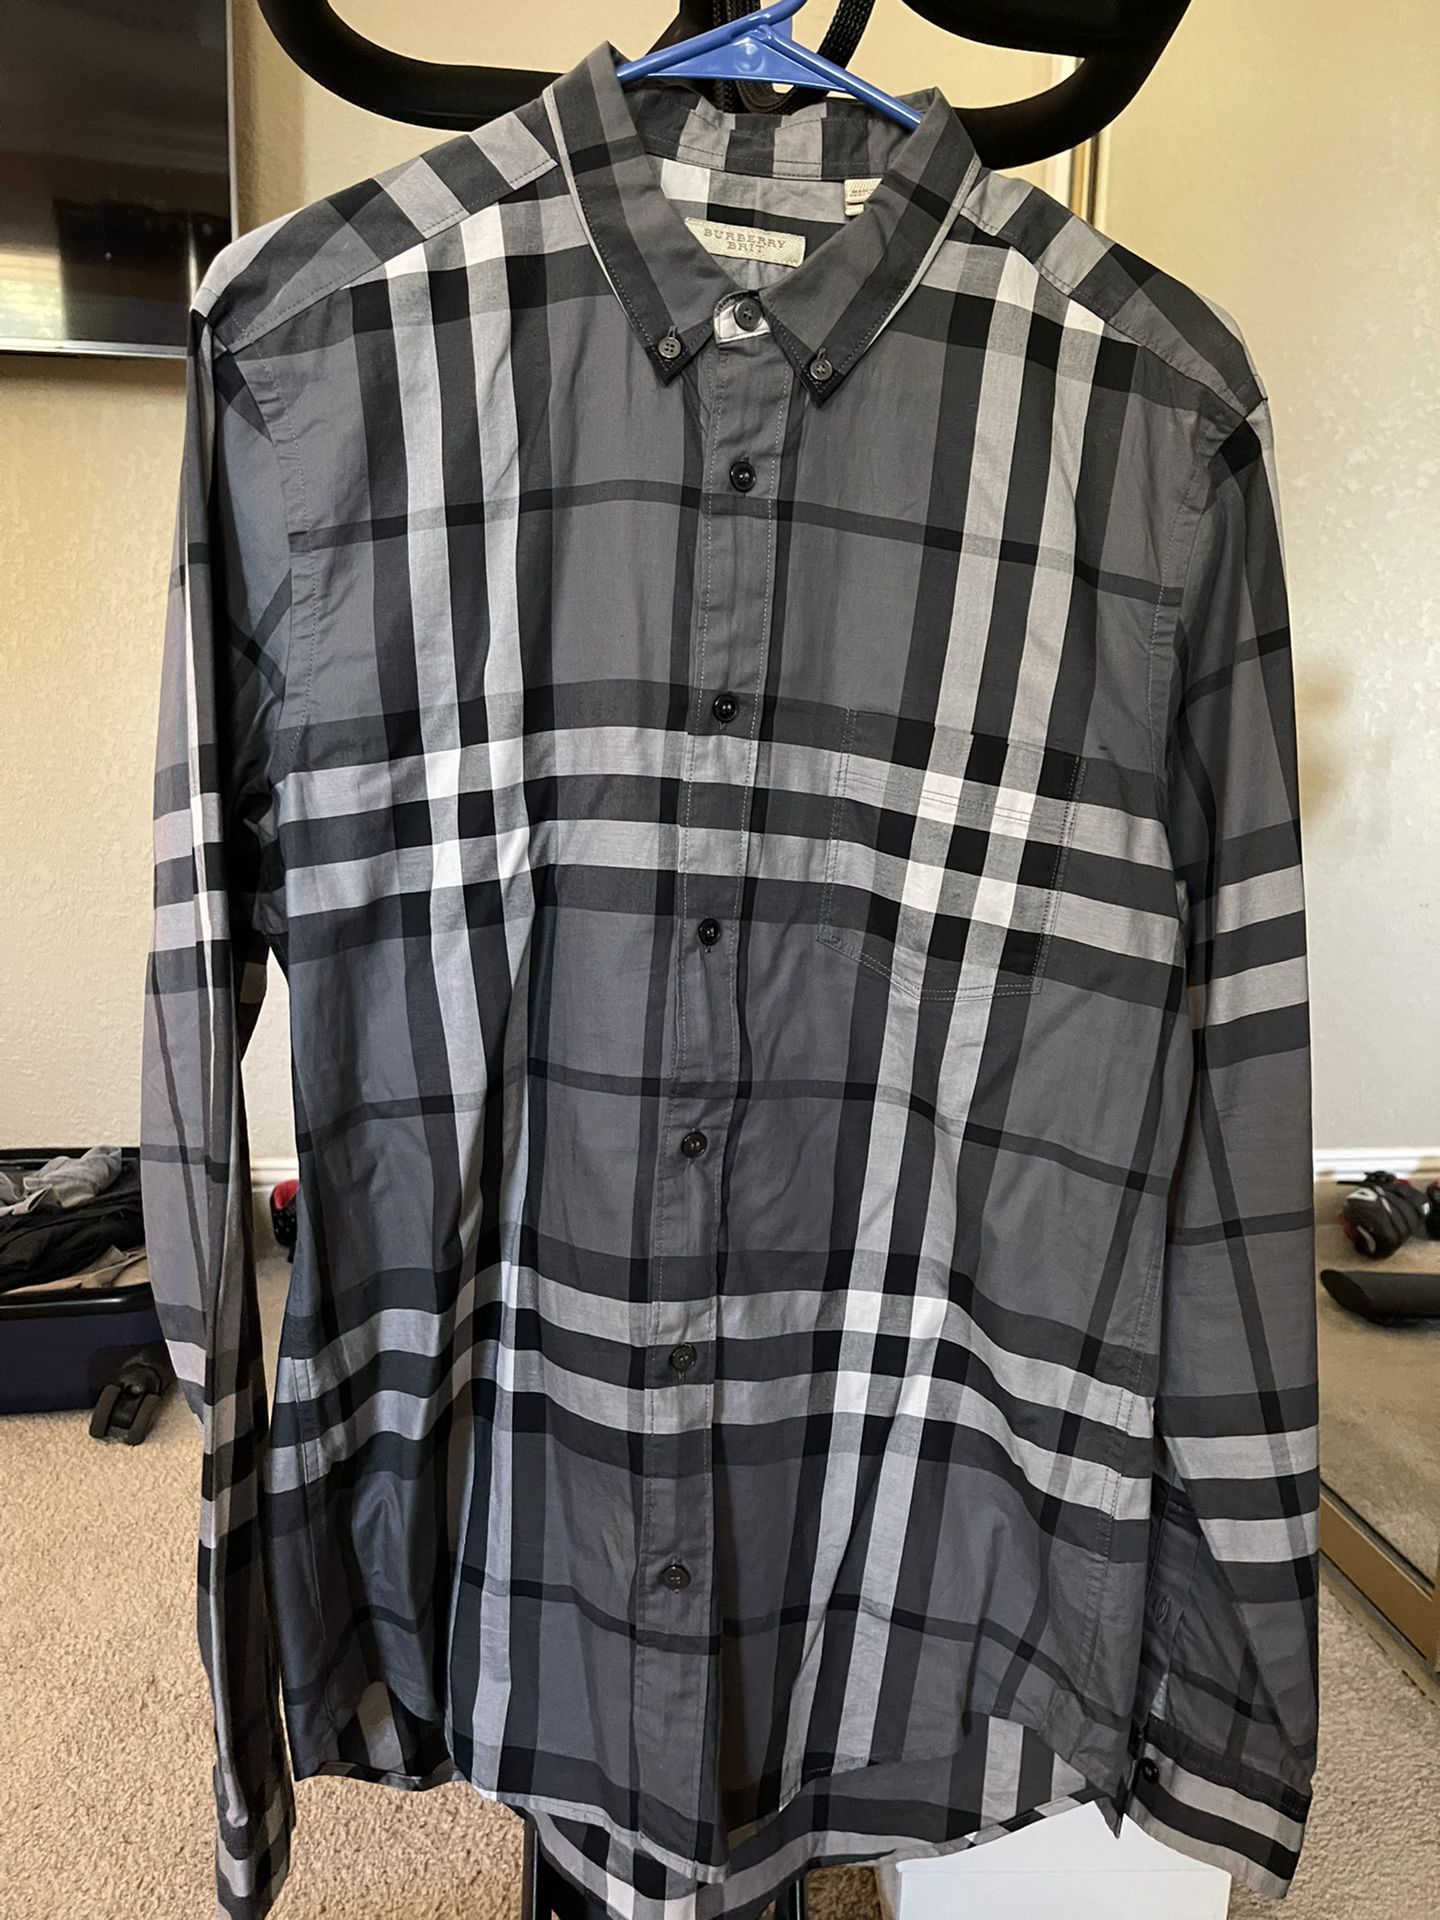 Burberry Long Sleeve Shirt. 100% Authentic